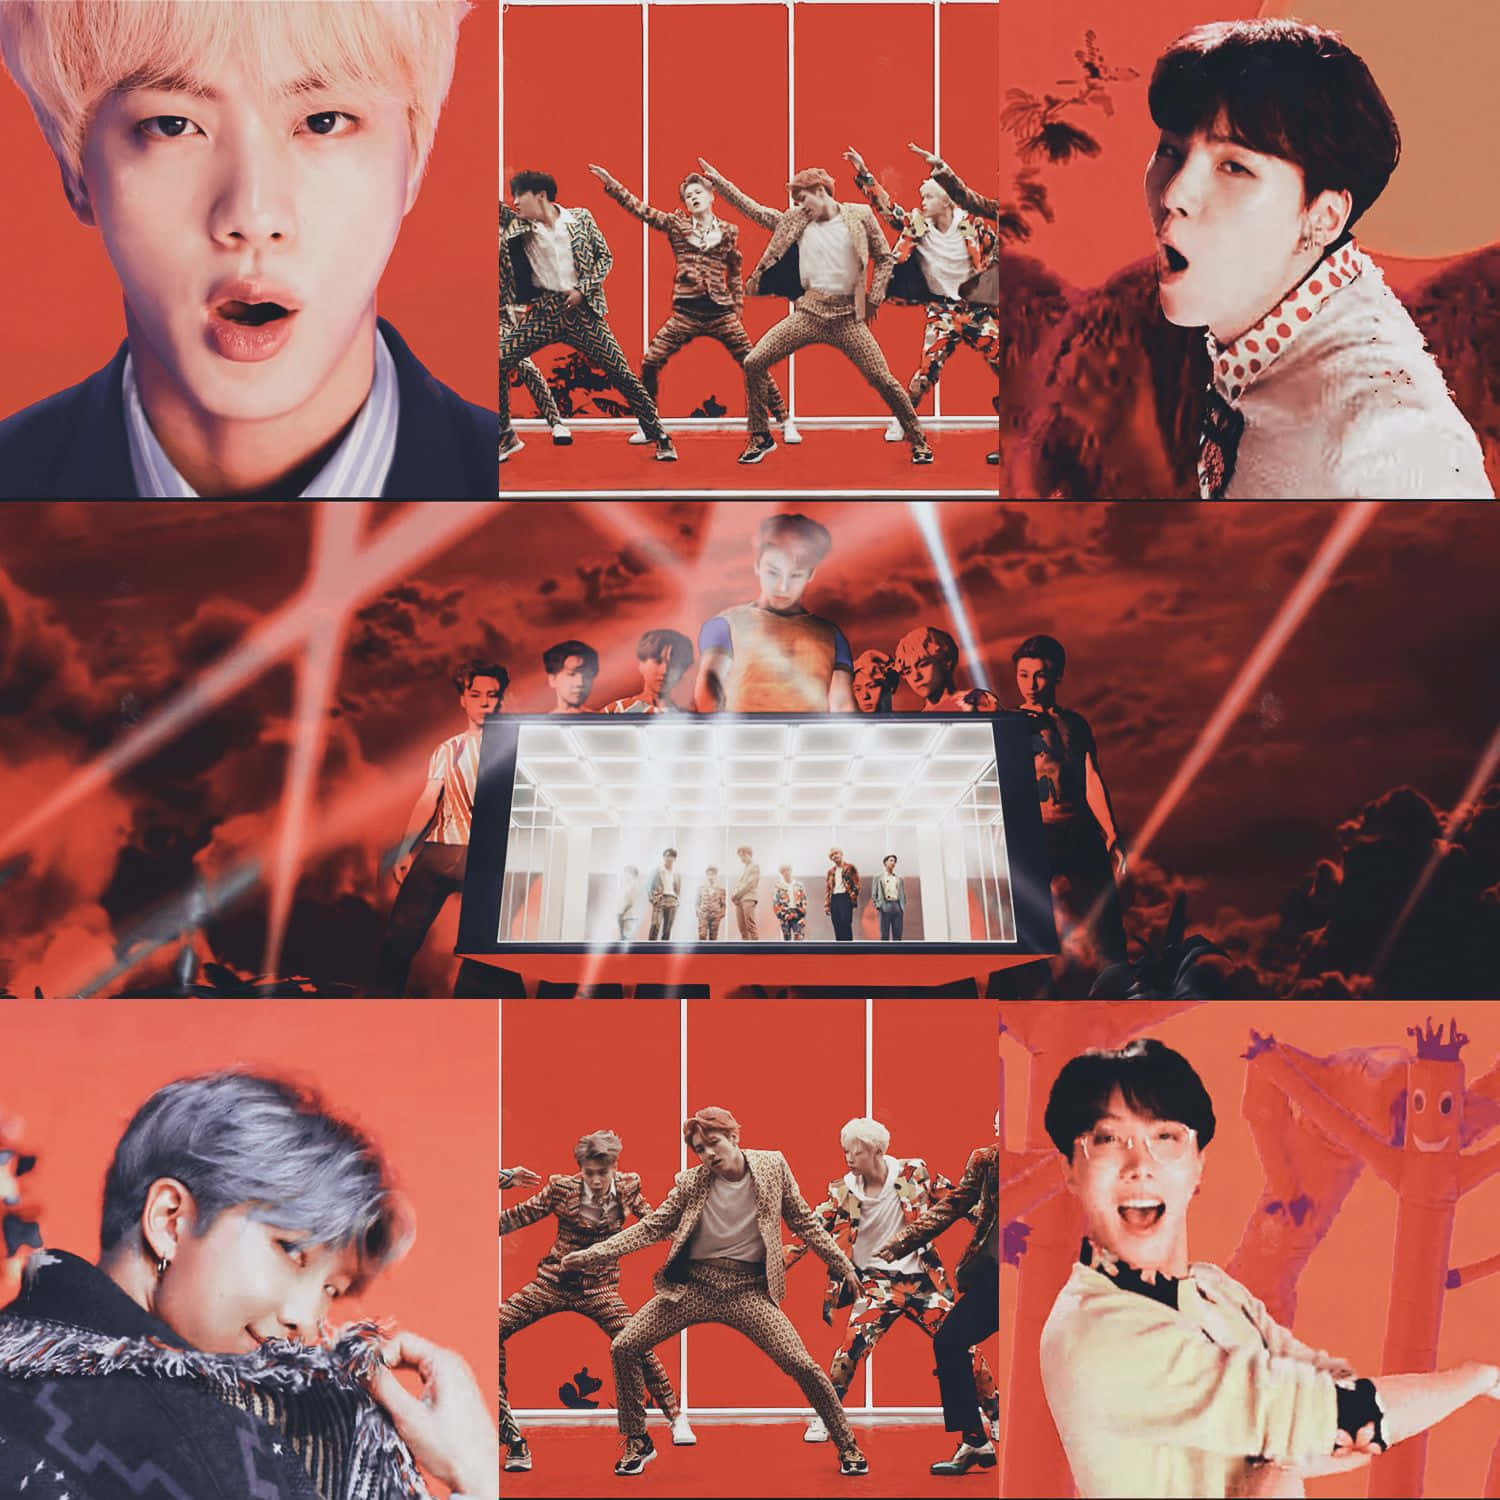 BTS performing in a visually stunning music video Wallpaper